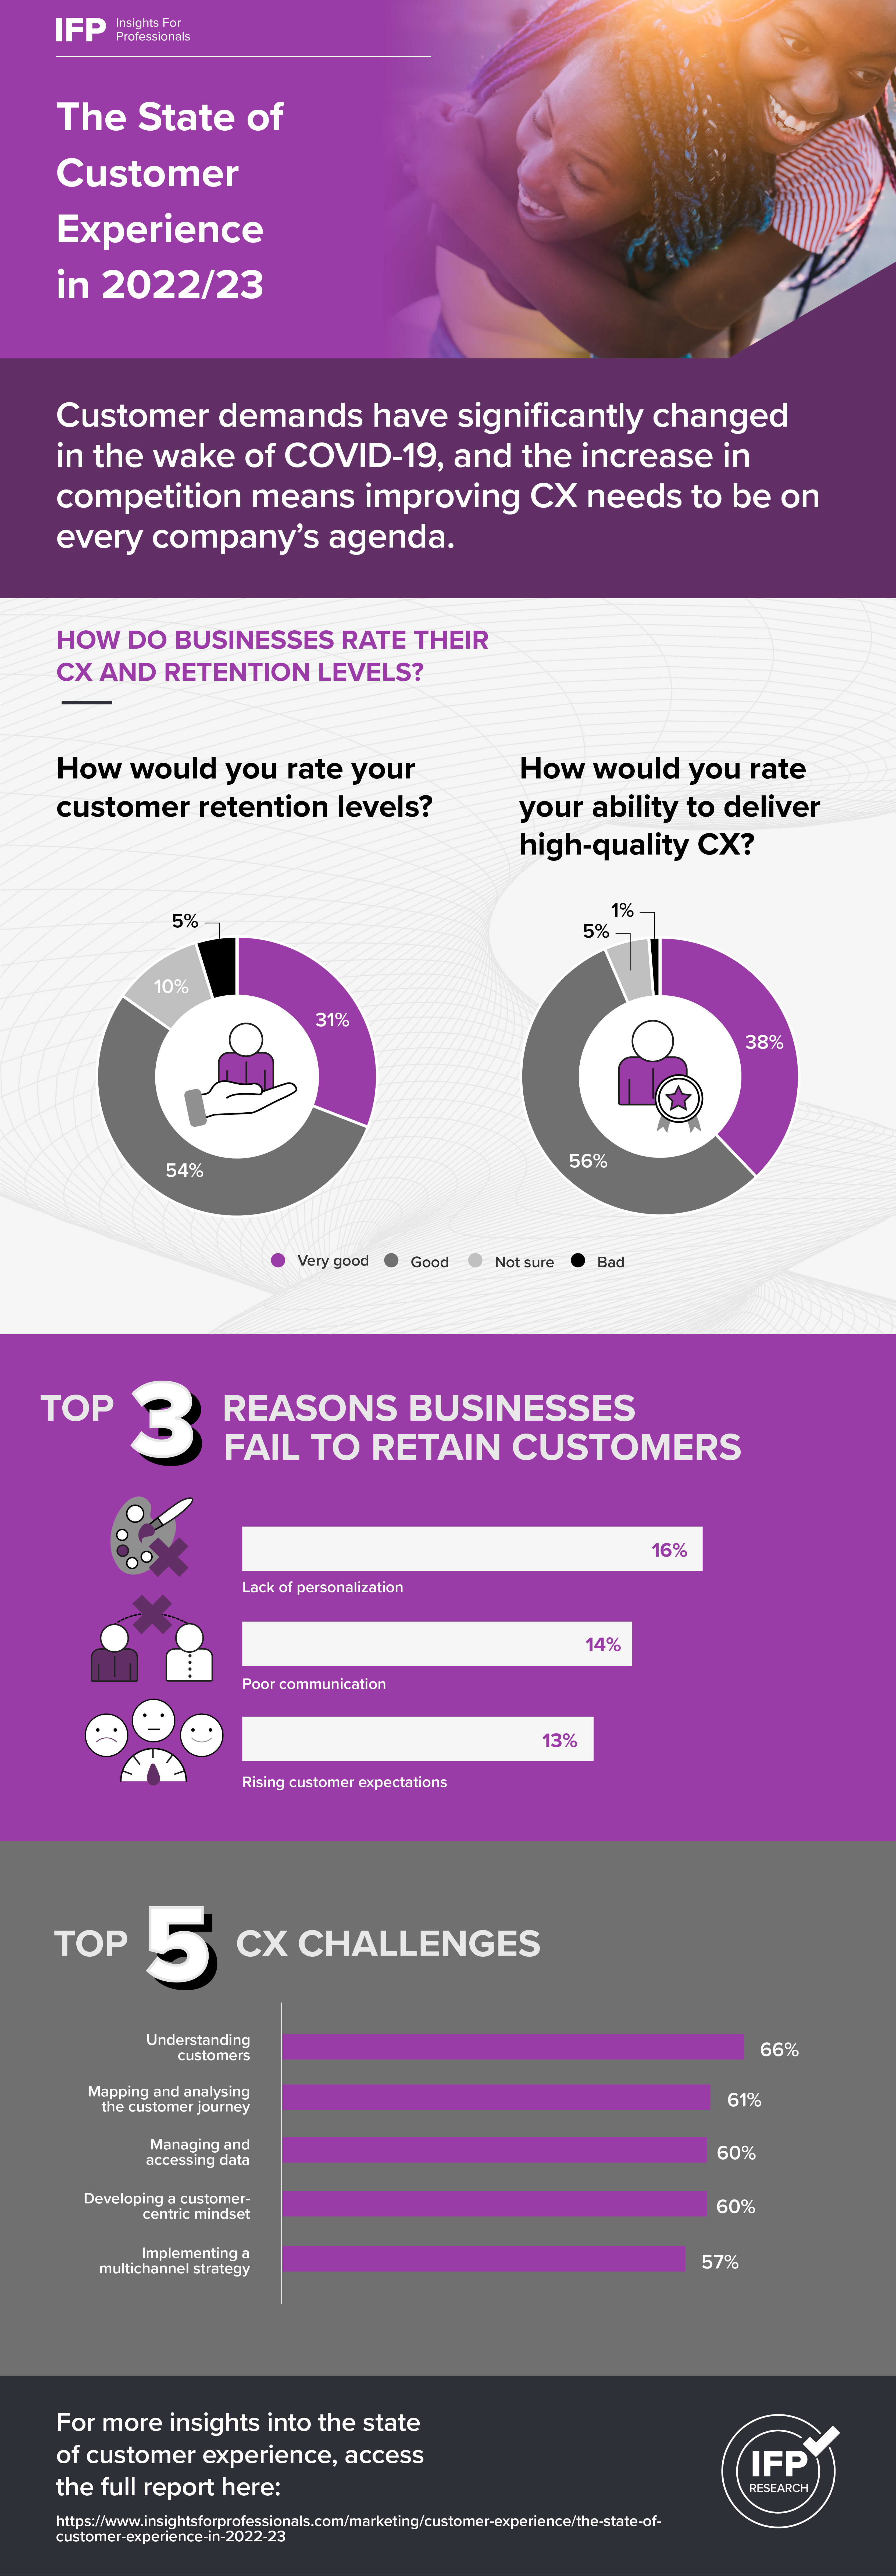 IFP infographic on the state of the CX landscape in 2023